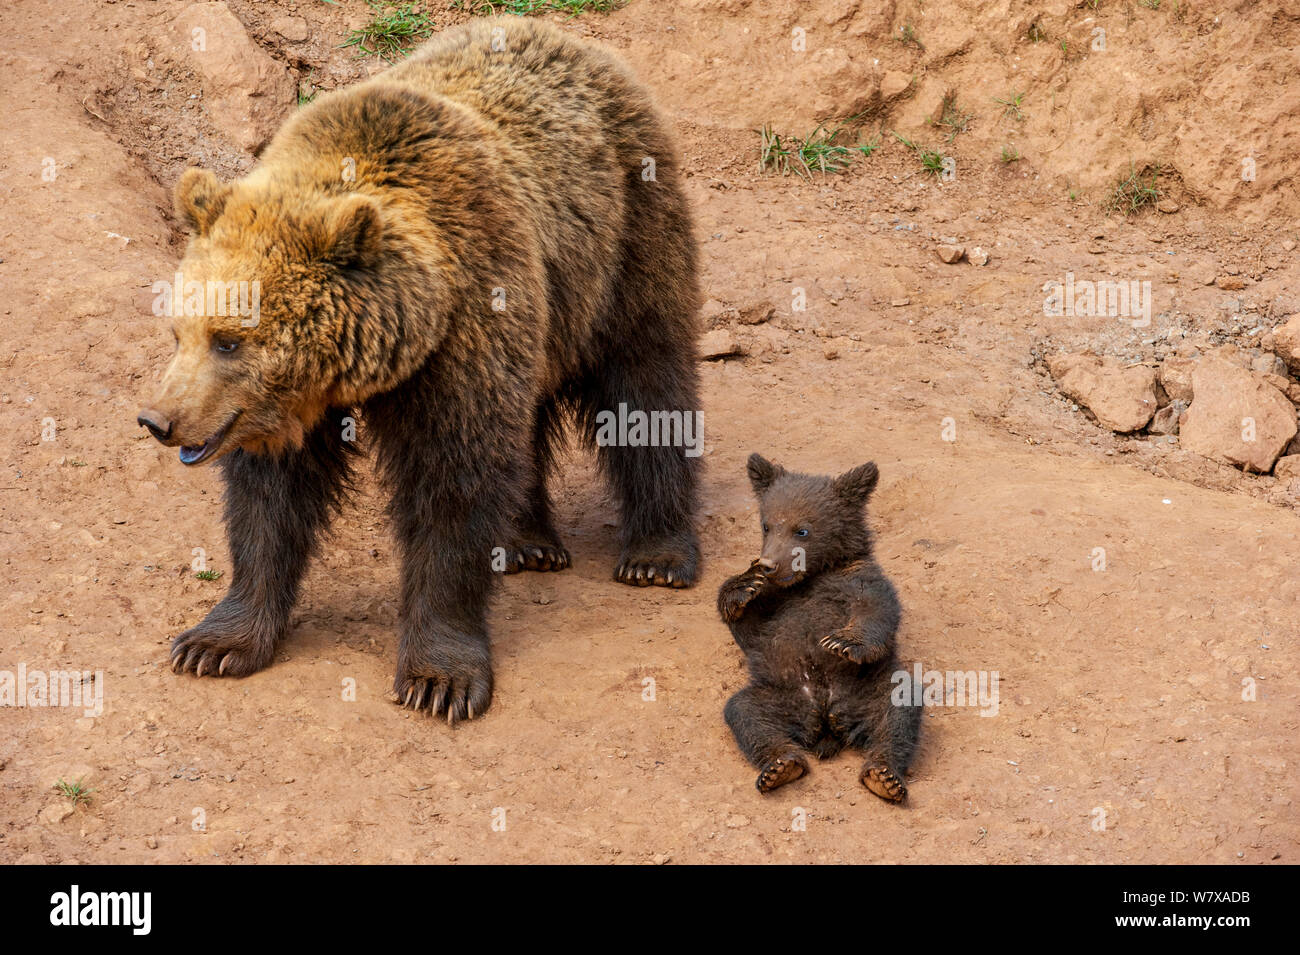 Eurasian brown bear (Ursus arctos arctos) mother with cub, Cabarceno Park, Cantabria, Spain, May. Captive, occurs in Northern Europe and Russia. Stock Photo